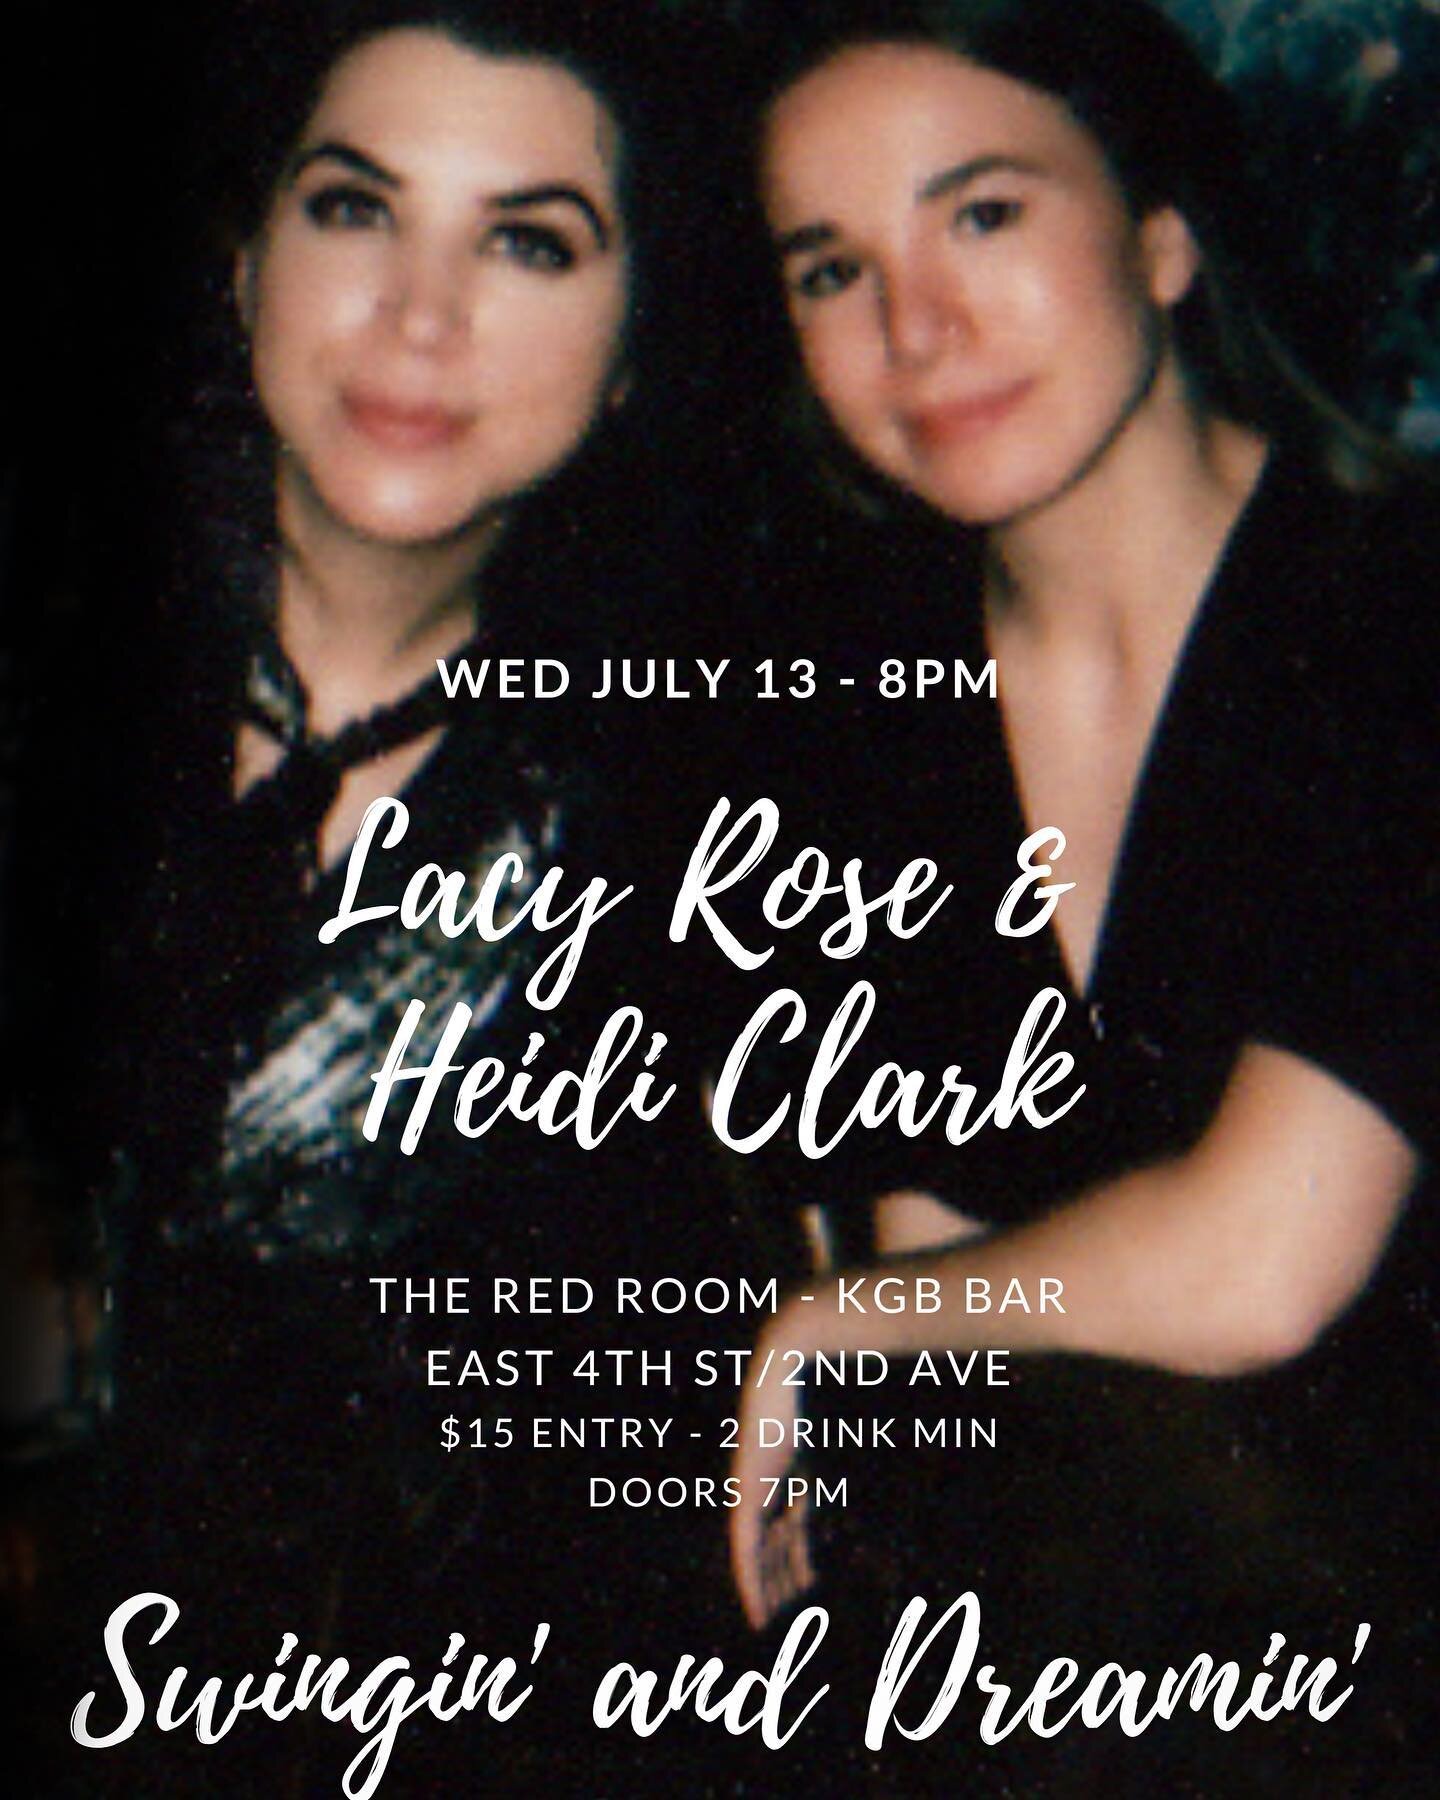 ⭐️July 13th, 8 pm @kgbbarredroom⭐️
✨✨✨✨✨✨✨✨✨
I will be performing vintage jazz and some originals with the amazing @littleredridinghood and @mattbakerjazz 
✨✨✨✨✨
✨
✨
✨
✨
✨
For more info link in bio! ✨✨✨✨✨
✨
✨
✨
✨
#july13th #newyorkartists #theredroom